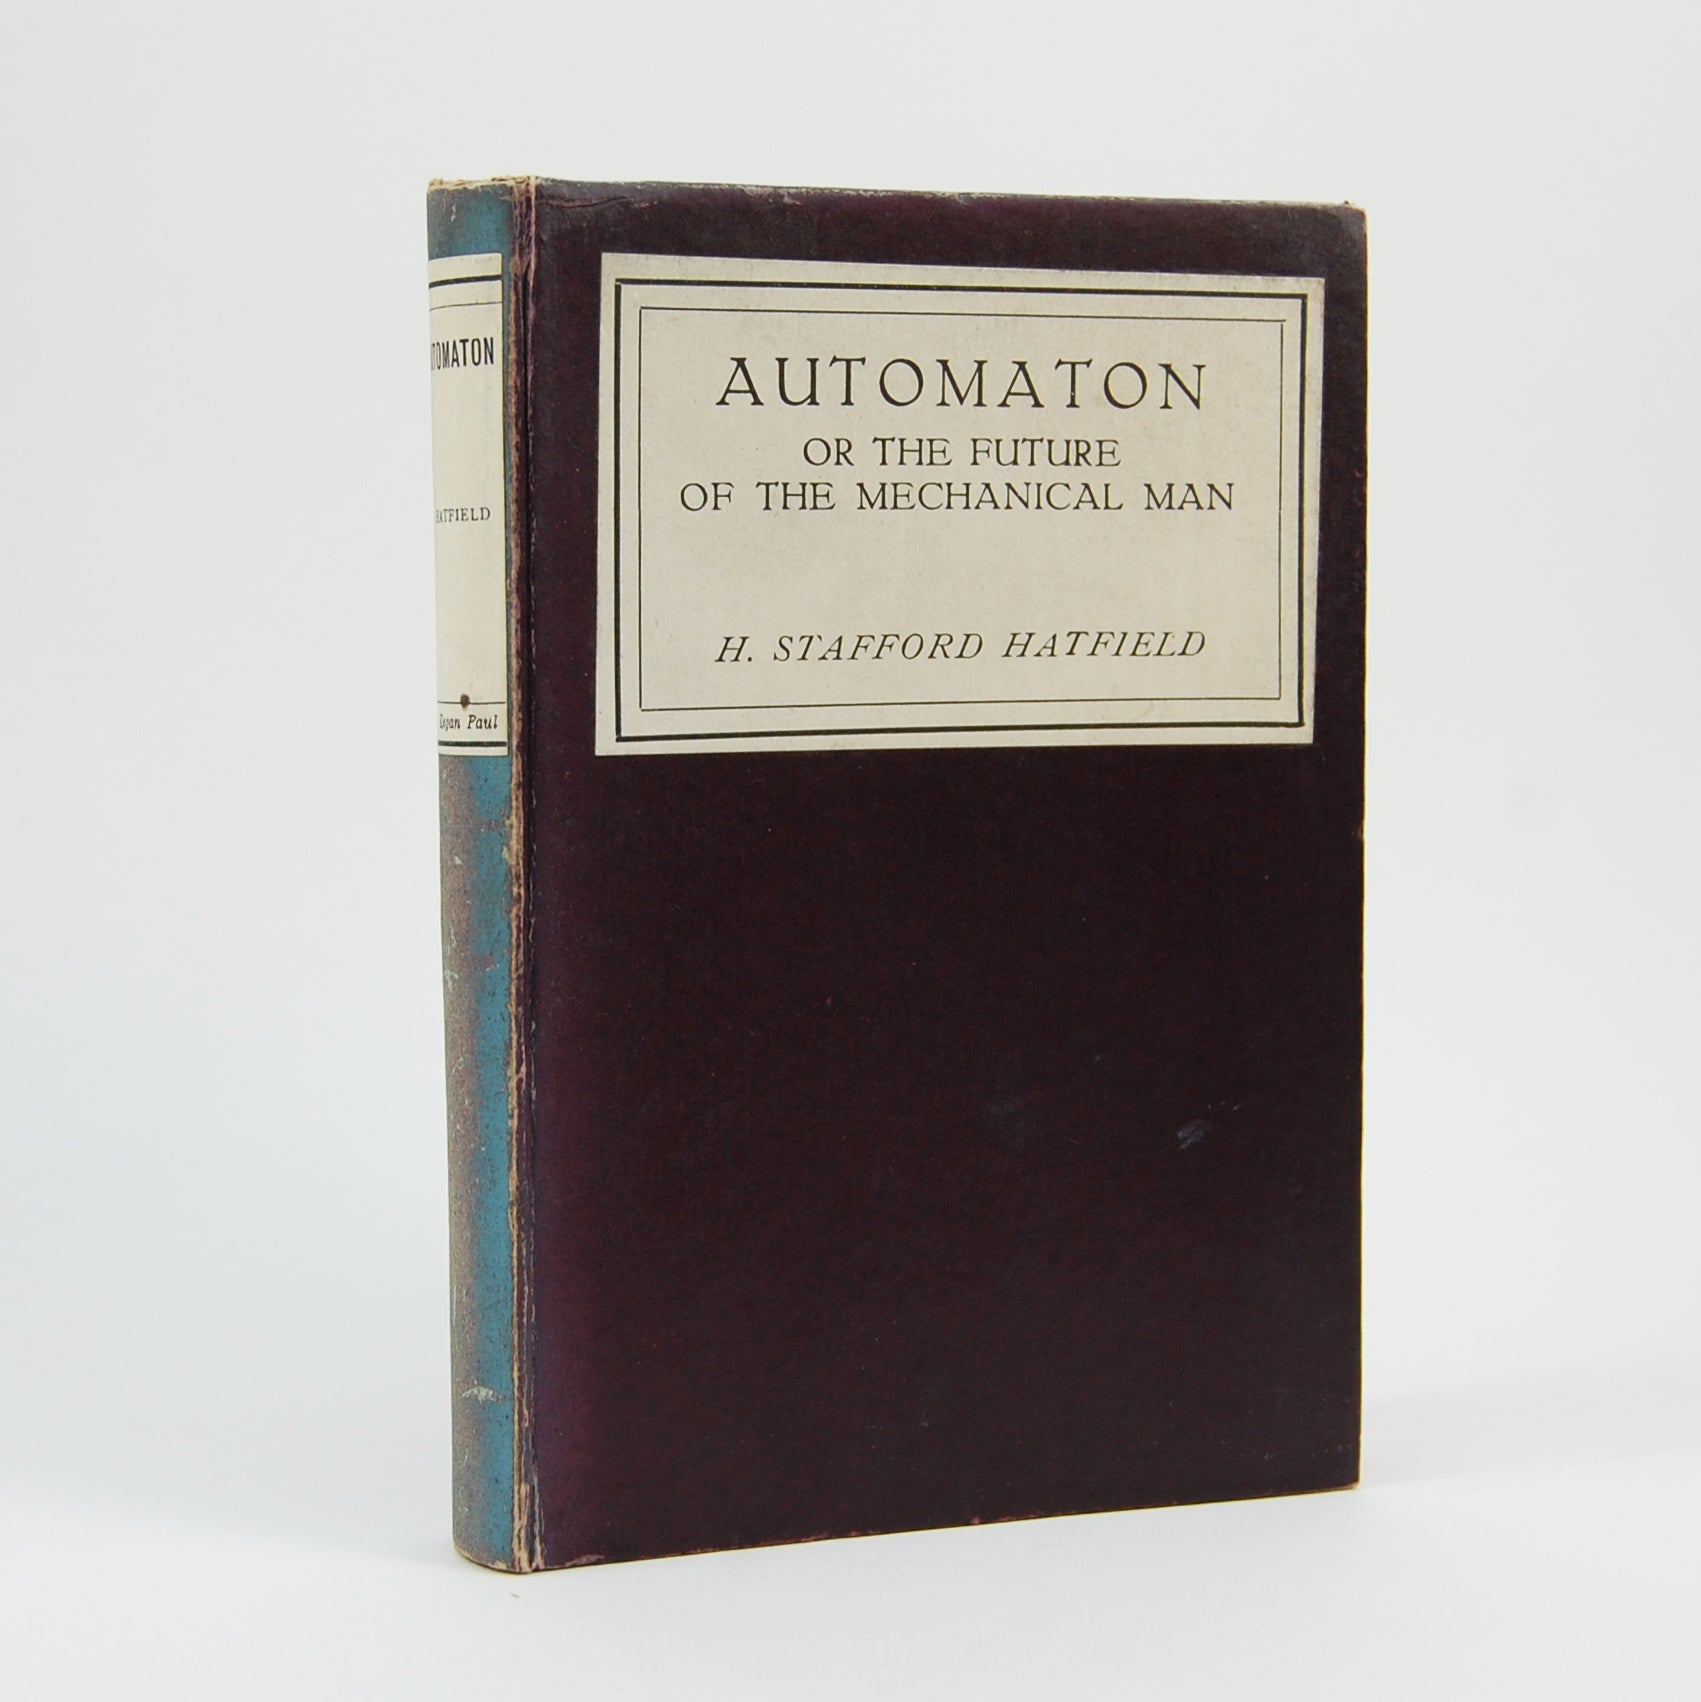 "The Difficulty Would be Stupendous": The Future of Automation in 1928